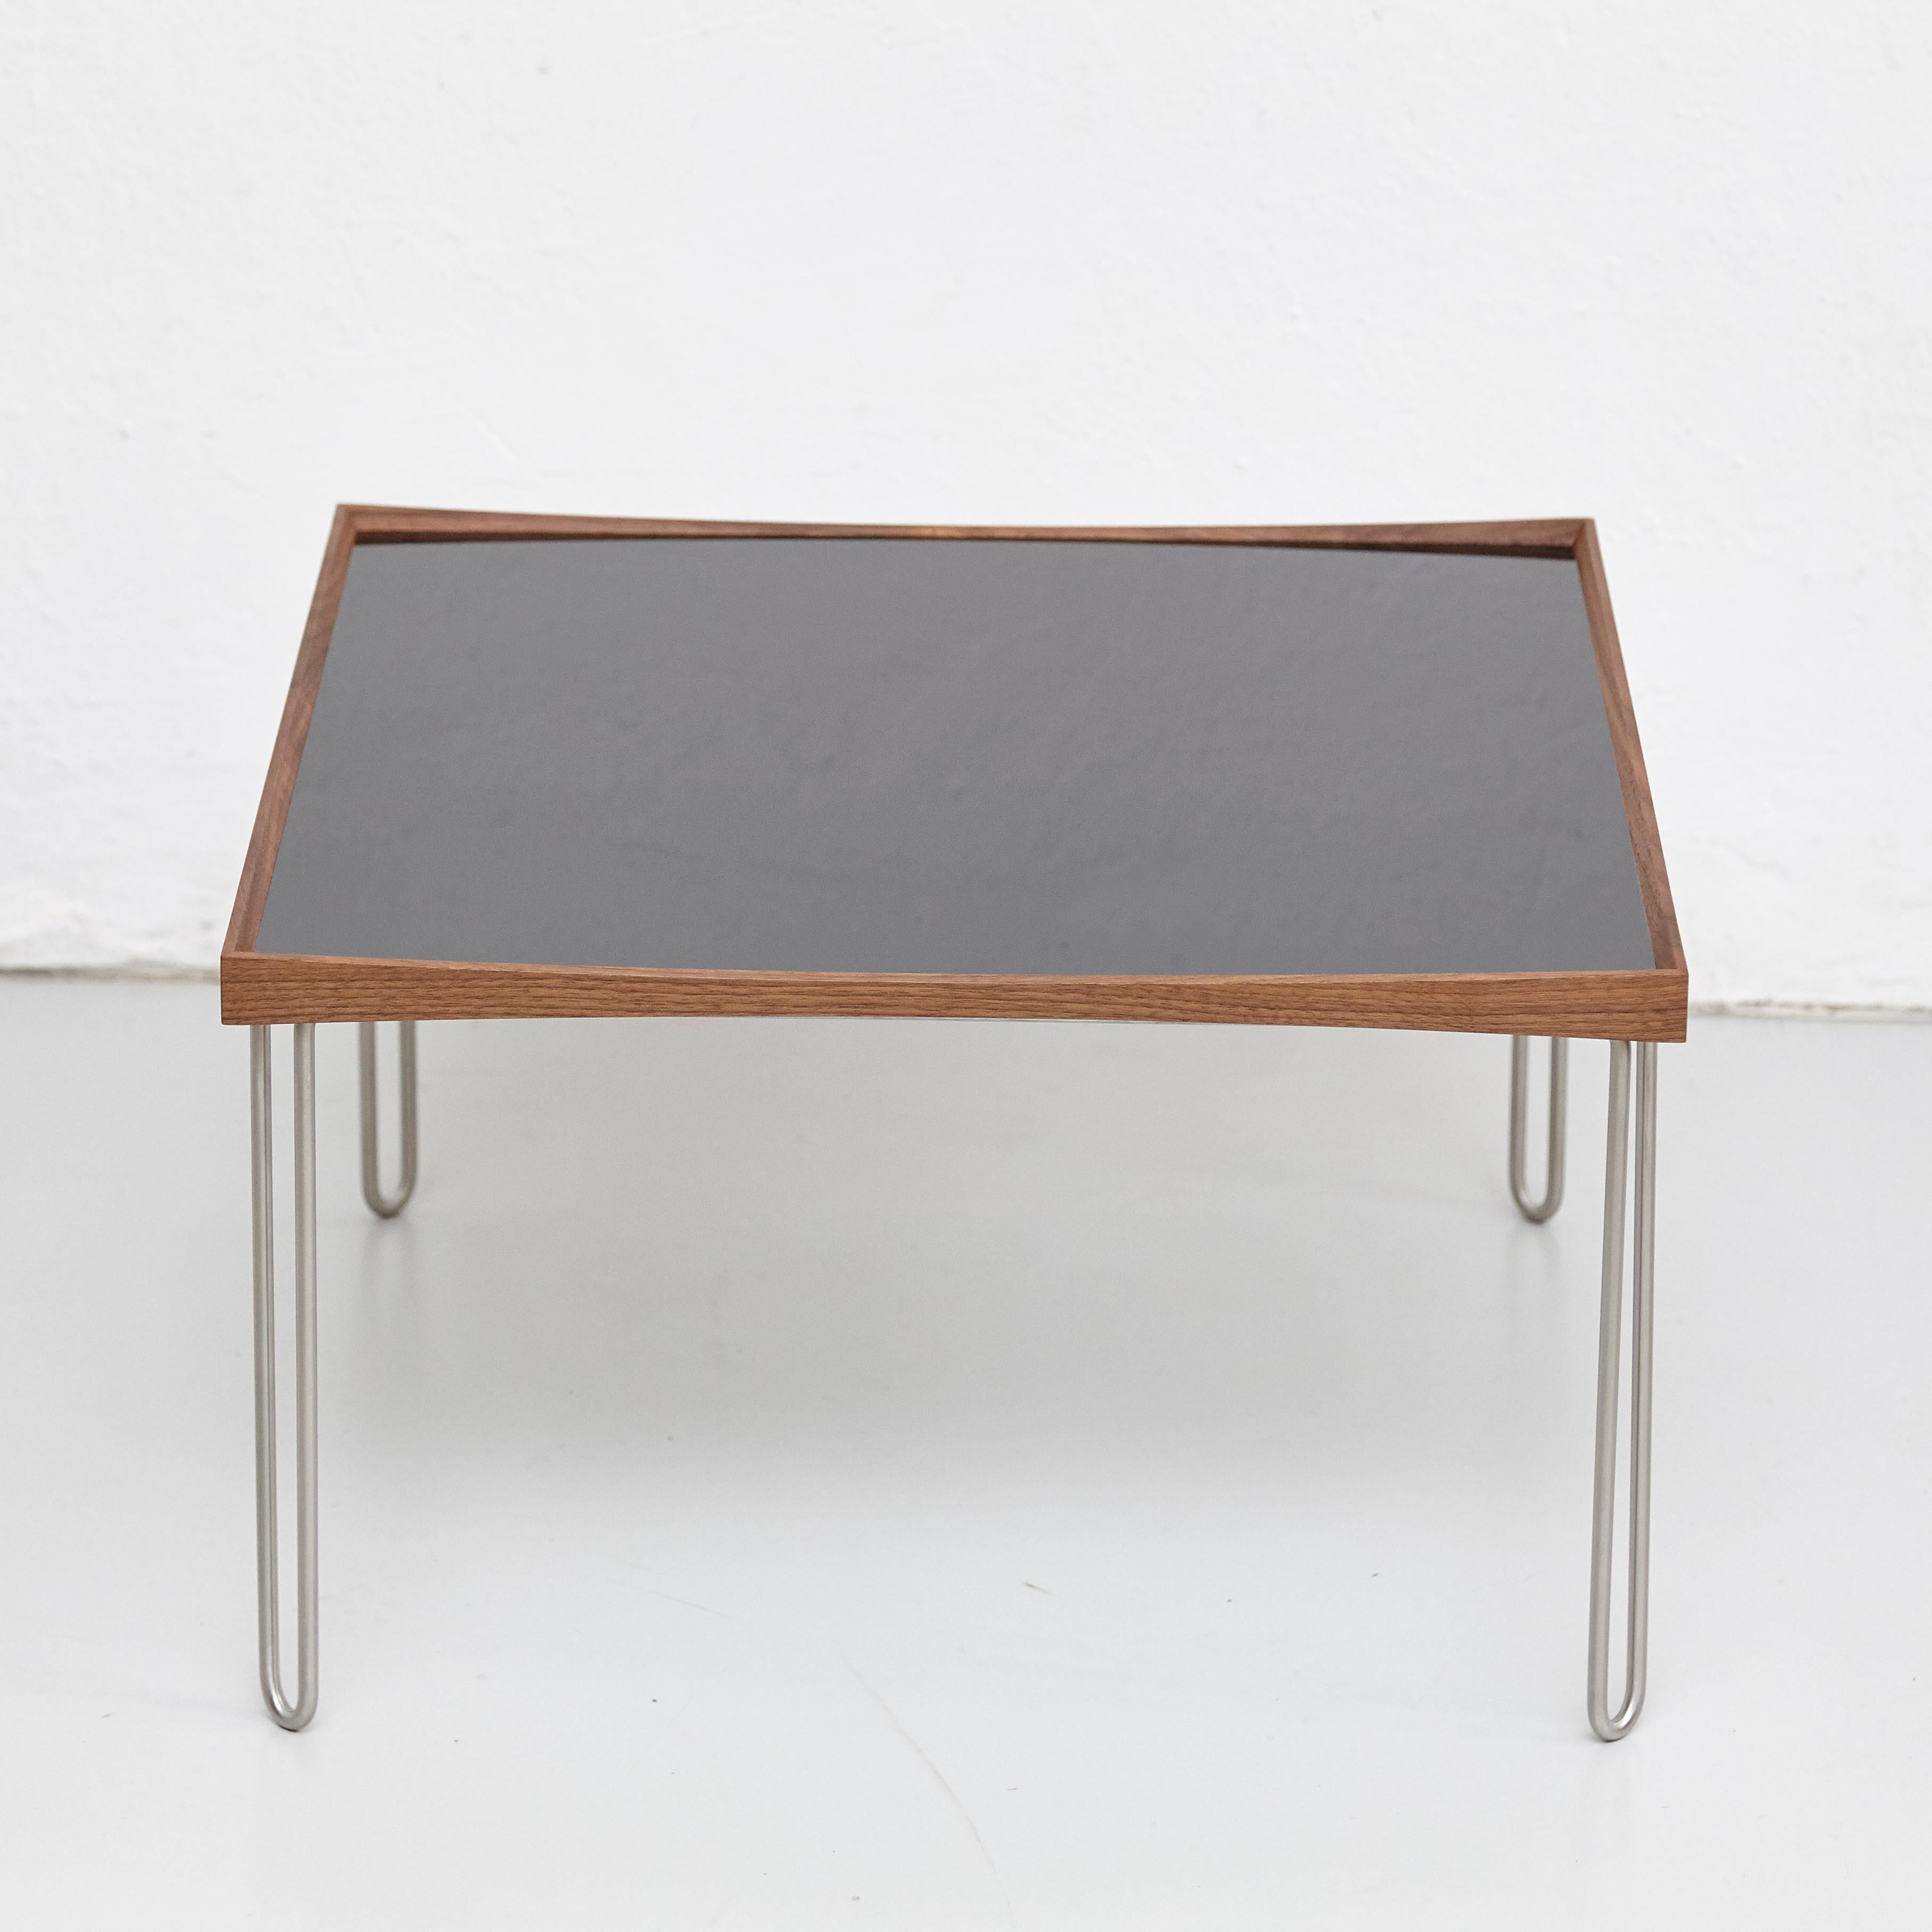 Table designed by Finn Juhl in 1965, relaunched in 2002.
Manufactured by House of Finn Juhl in Denmark.

The Tray Table, designed by Finn Juhl in 1965, is a further development of his famous Turning Trays, which today are manufactured by